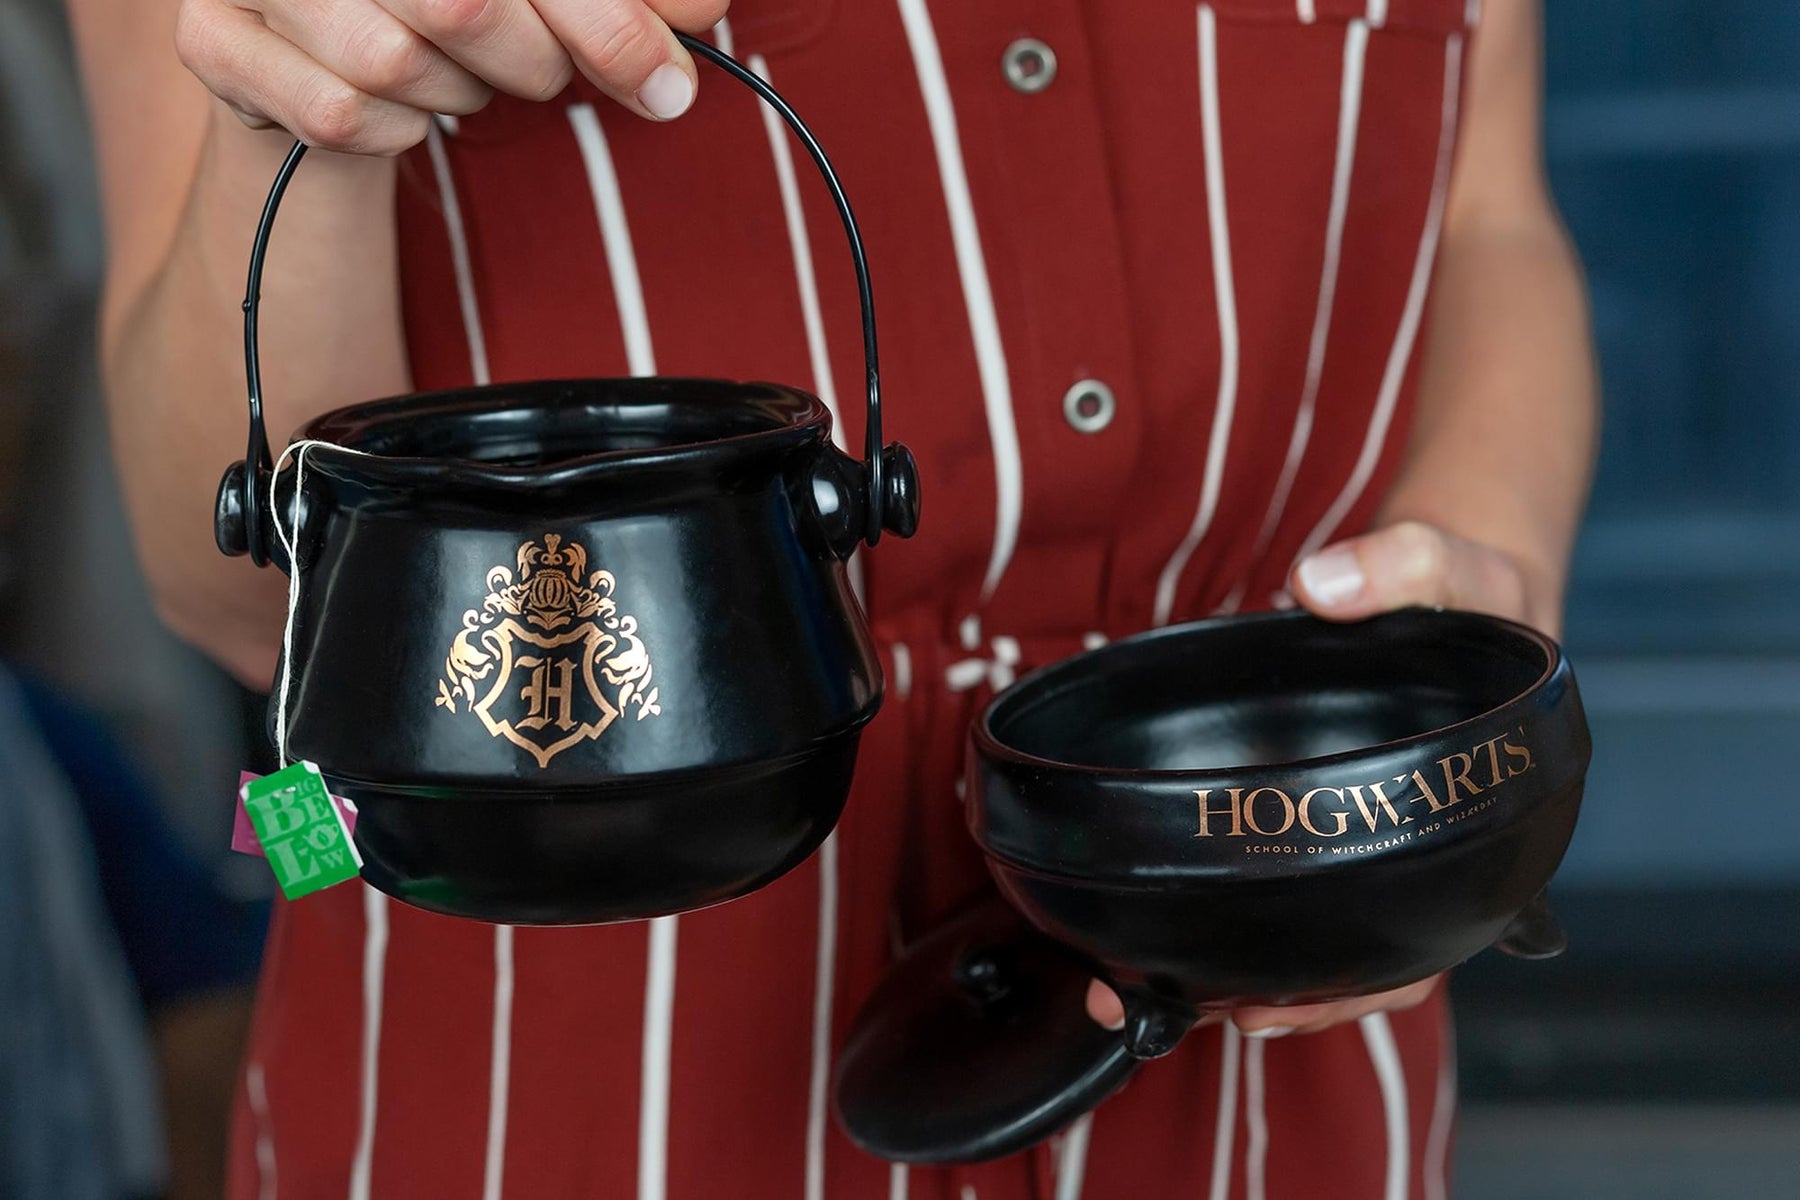 Harry Potter Tea-For-One Cauldron Teapot And Cup Set | Featuring Hogwarts Crest